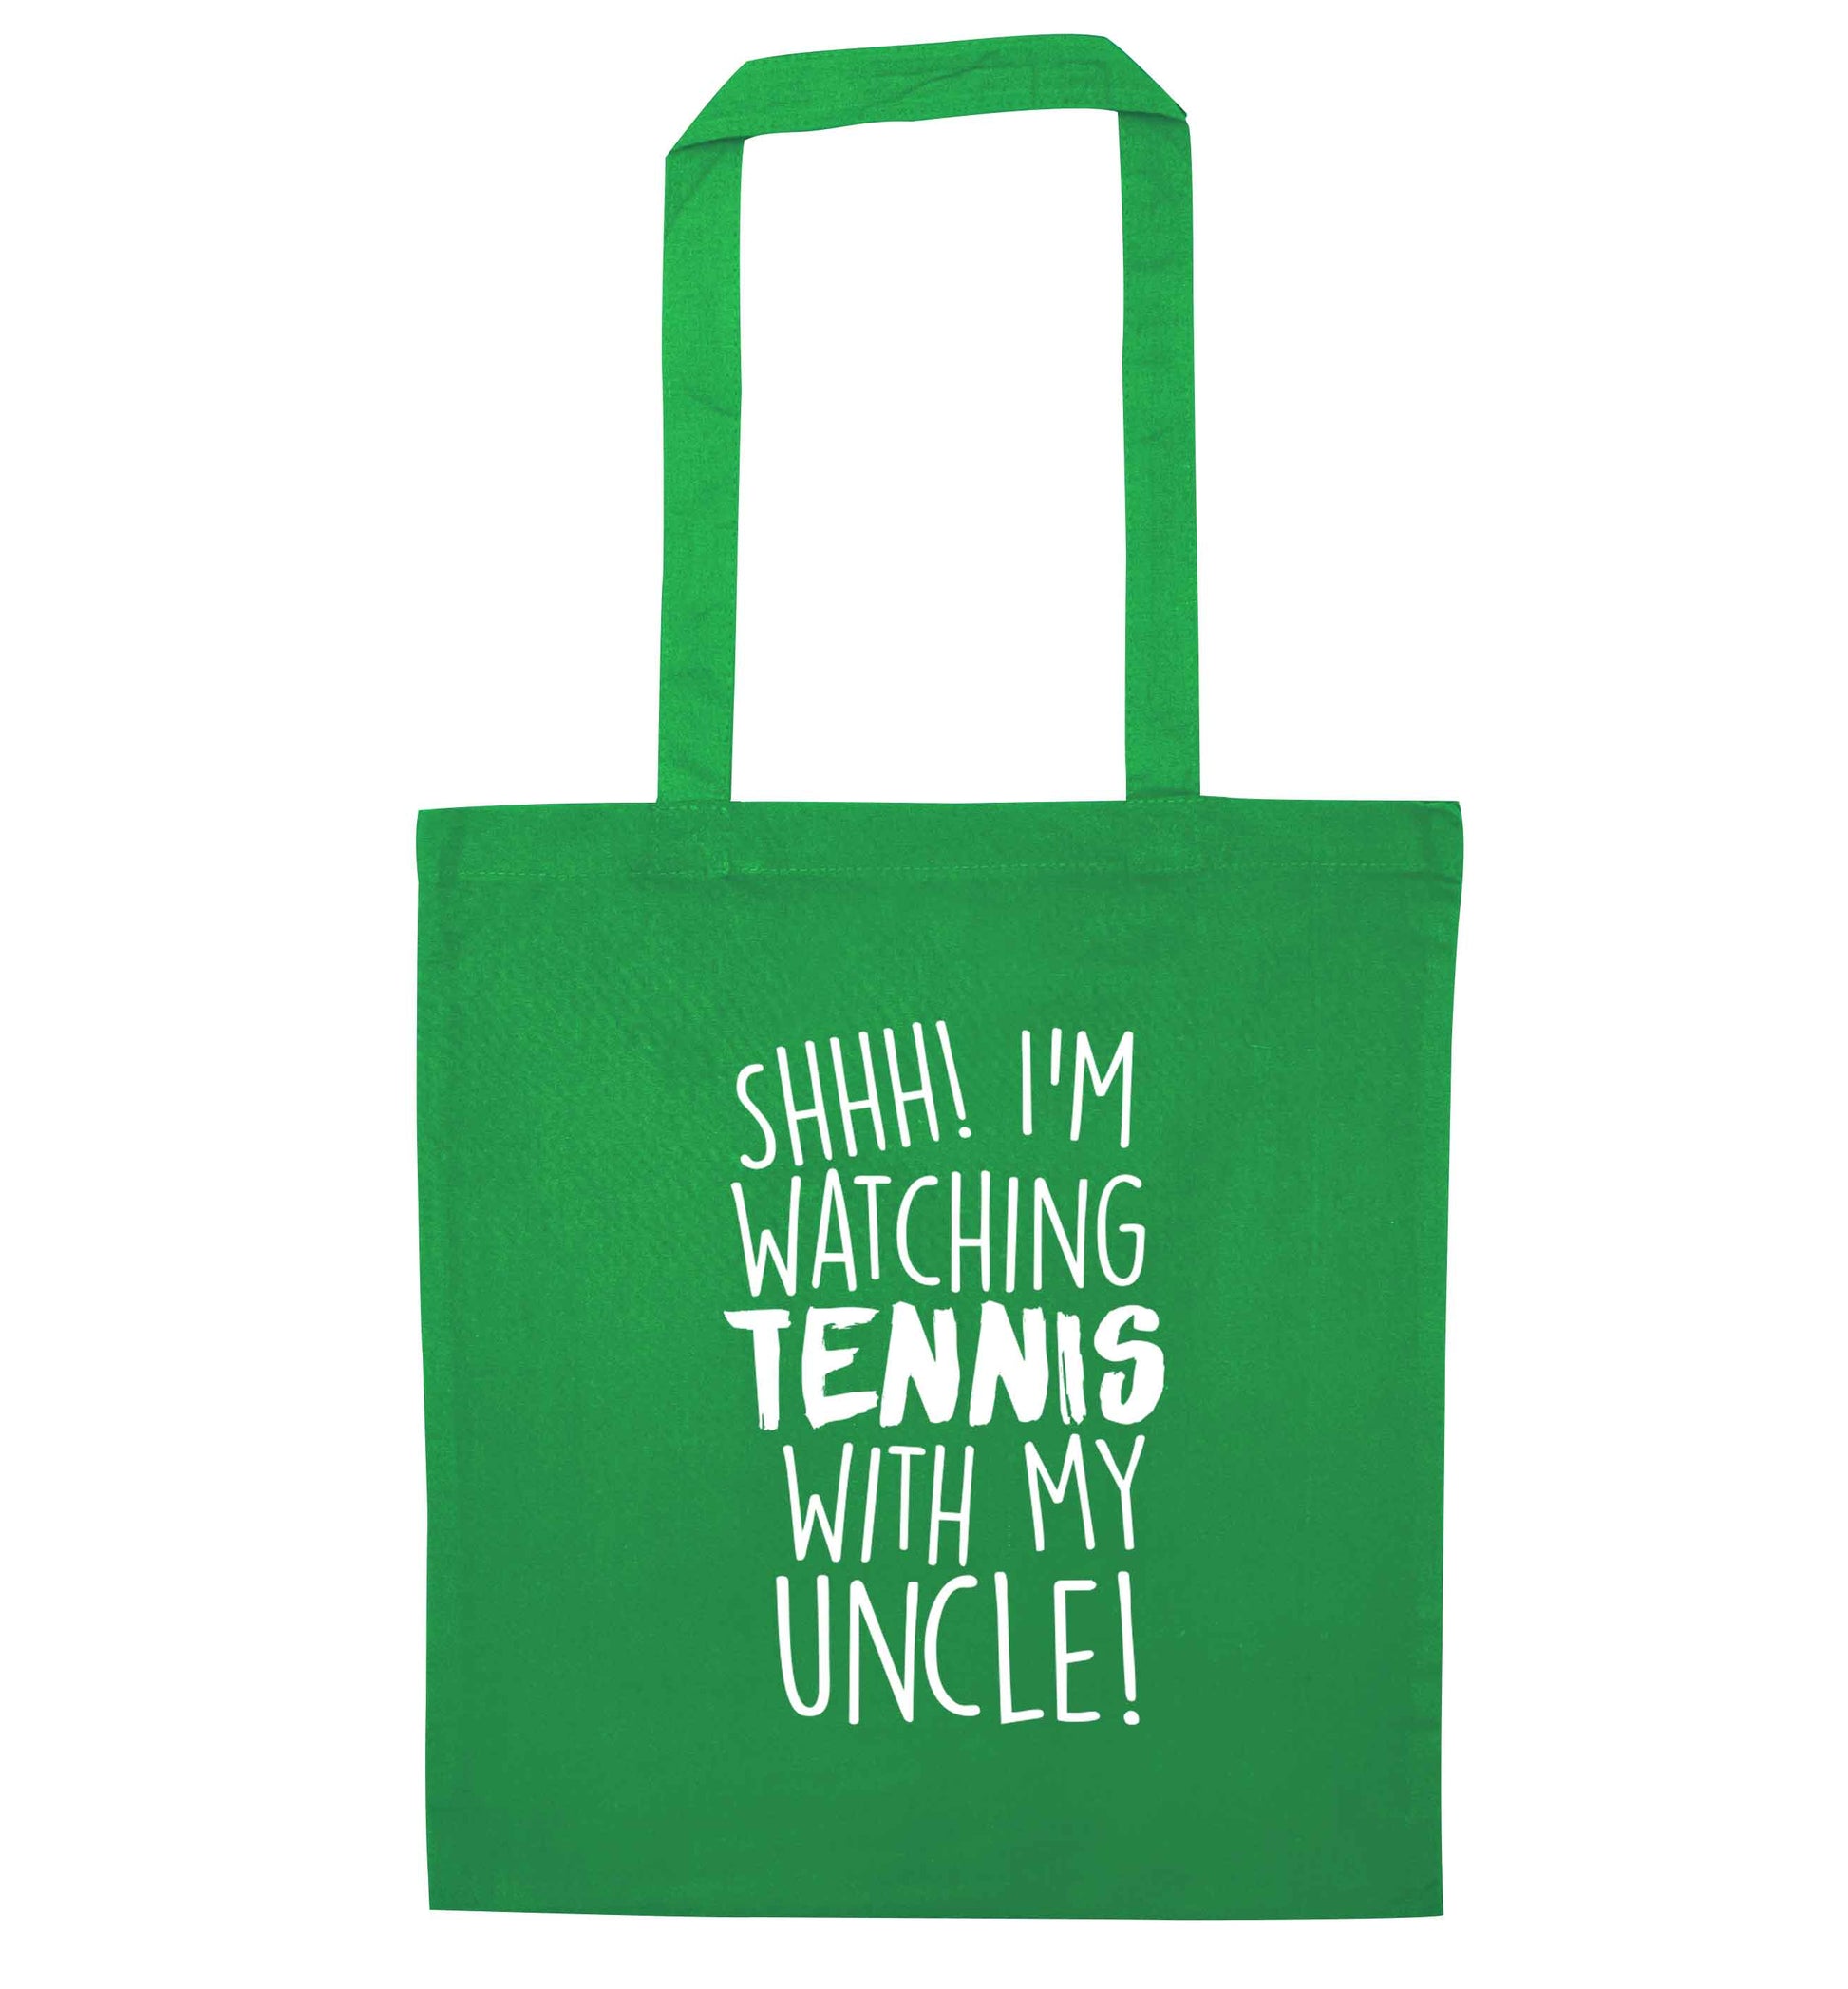 Shh! I'm watching tennis with my uncle! green tote bag